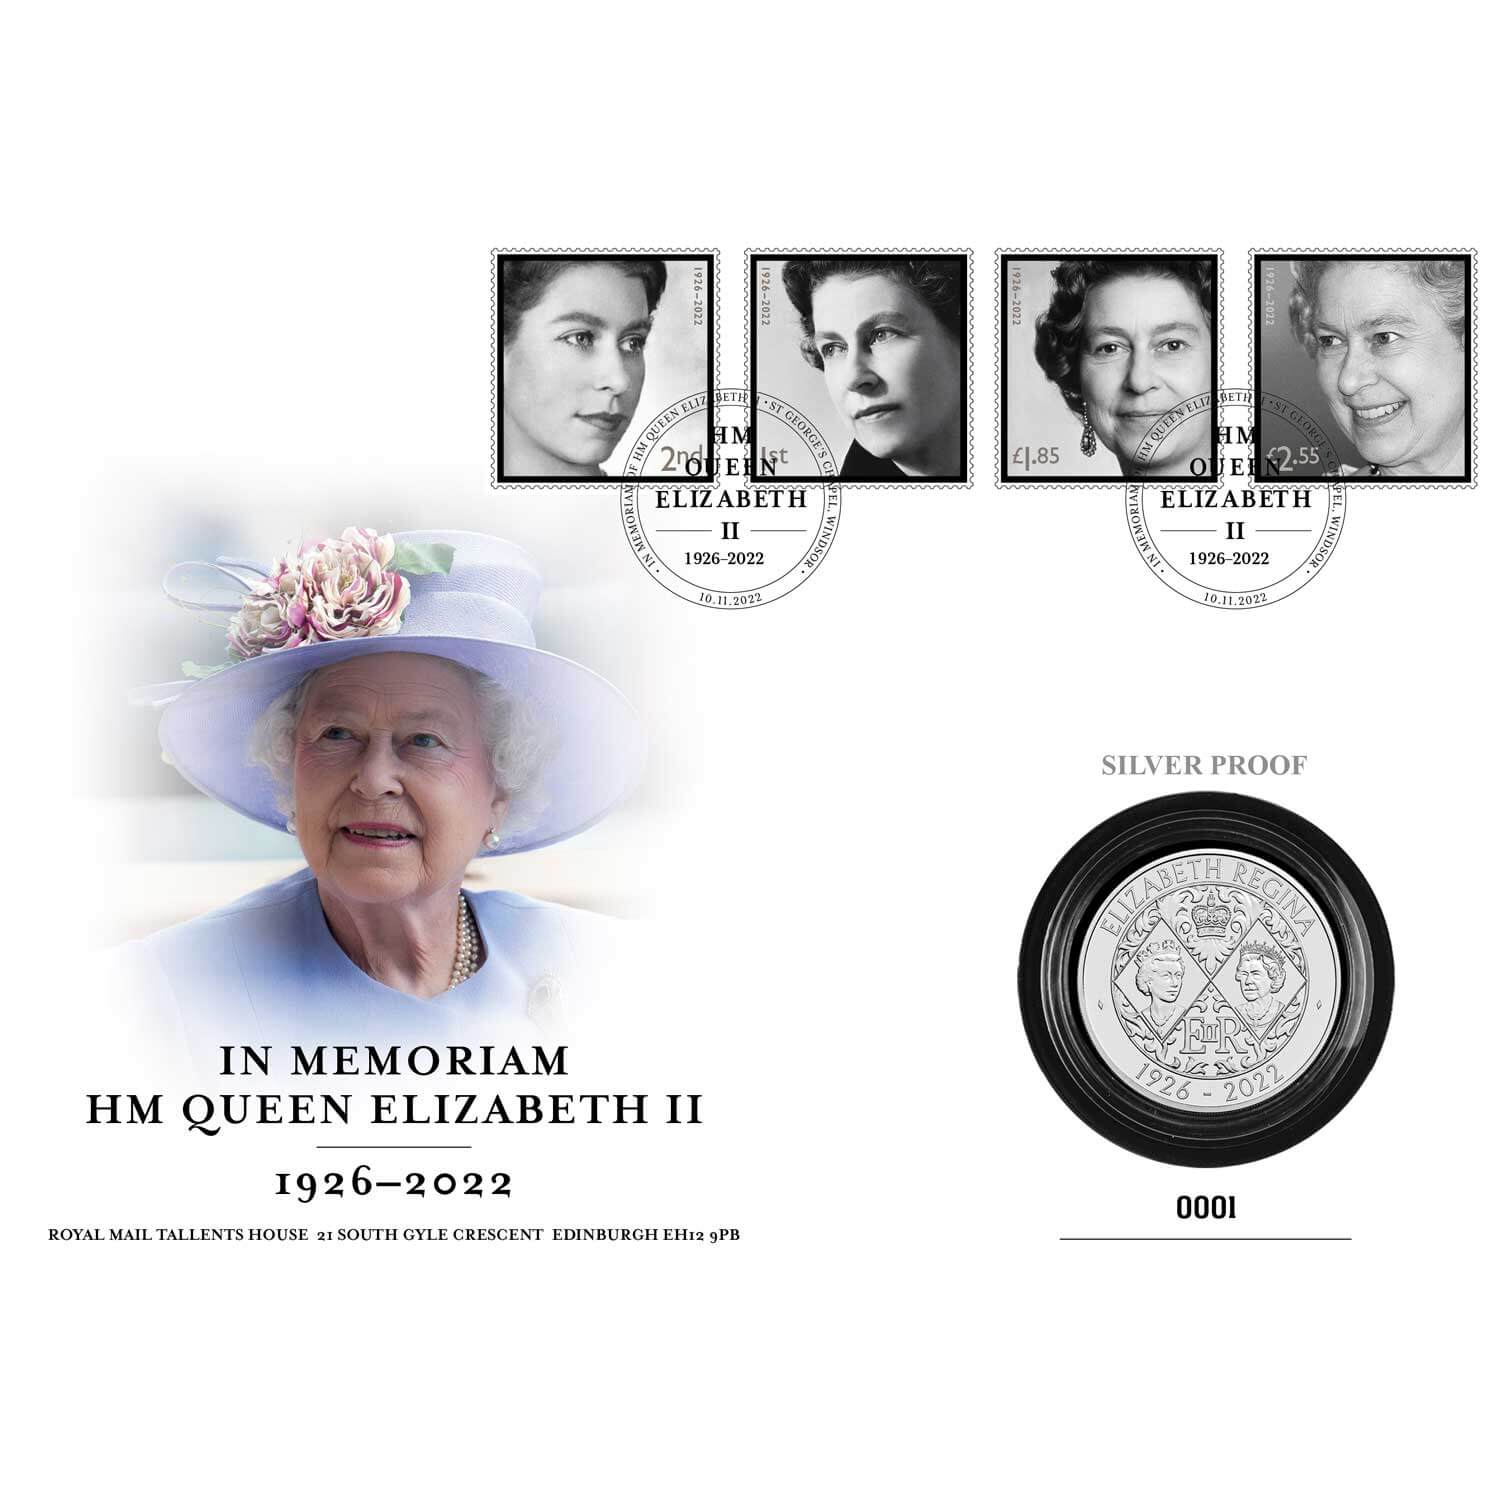 Her Majesty Queen Elizabeth II 2022 UK £5 Silver Proof Coin Cover